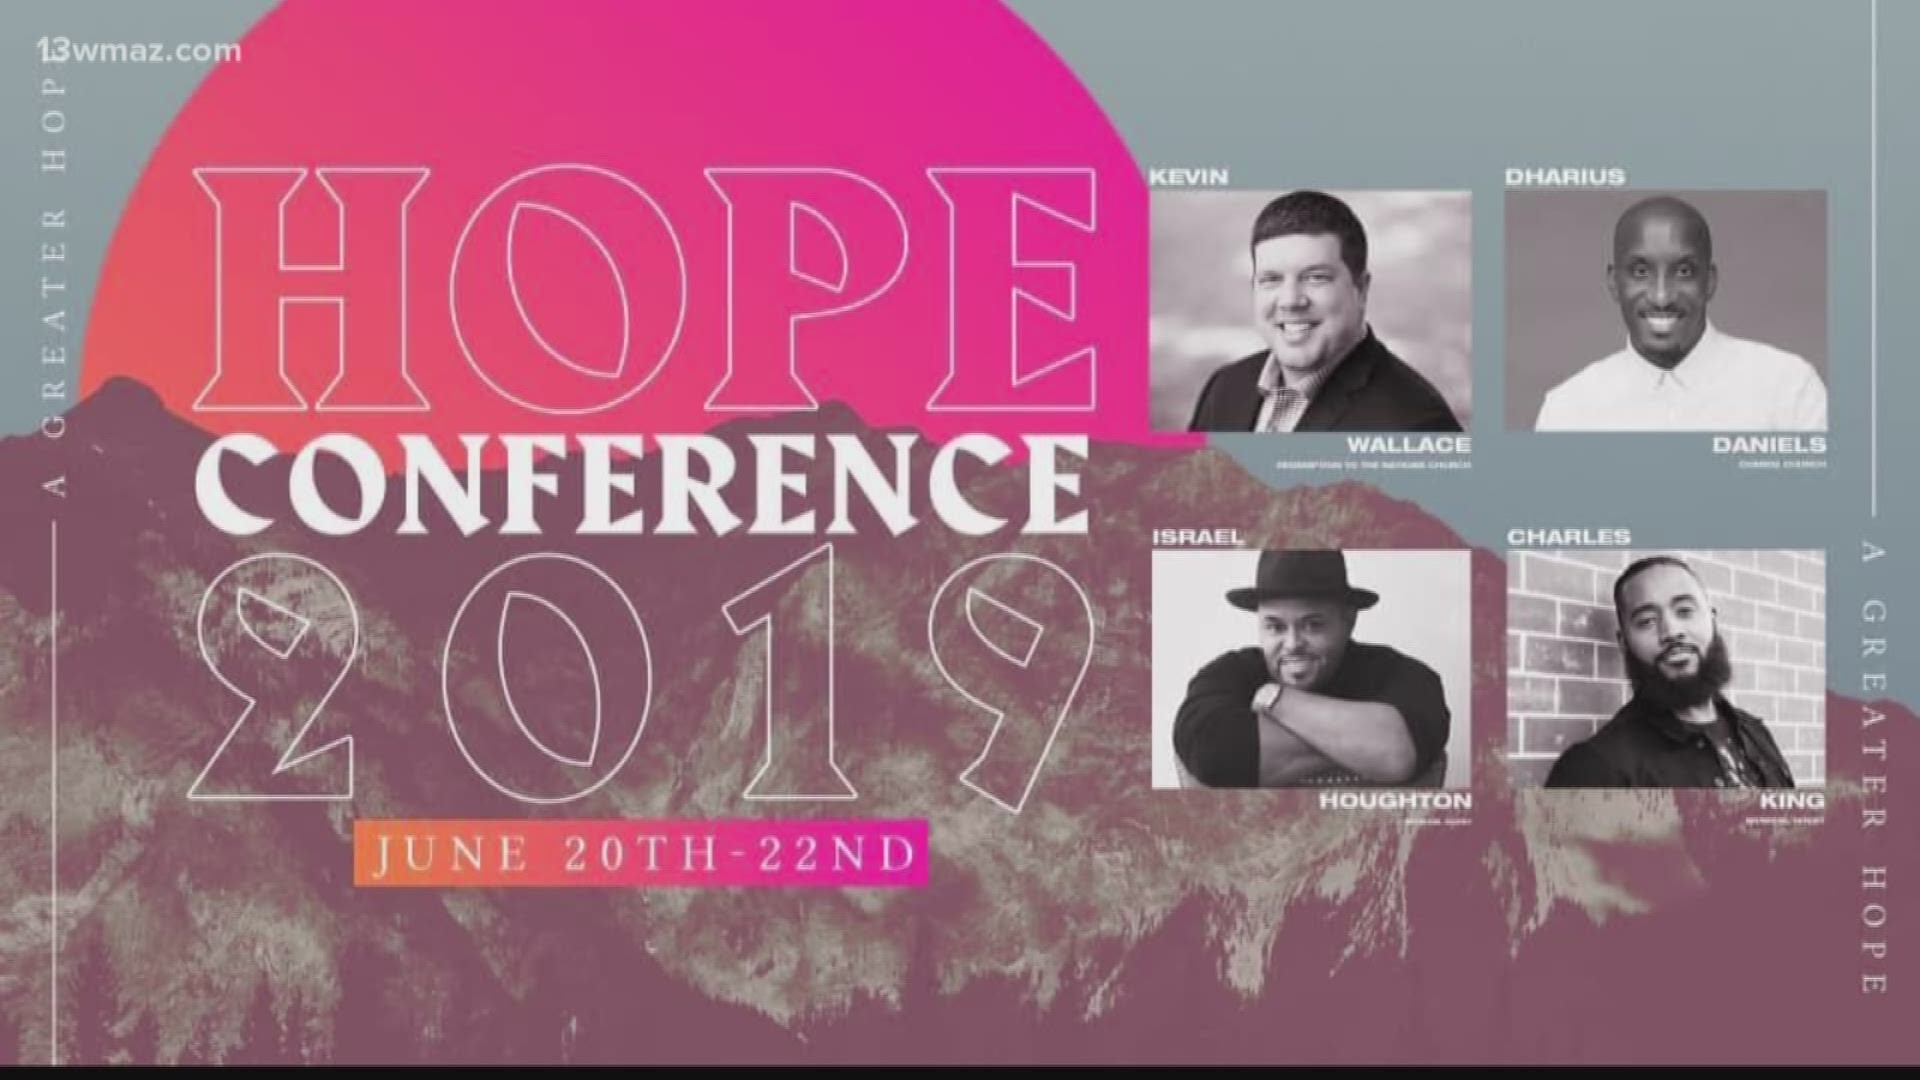 AMPED UP: HOPE Conference helps people exercise mind, body, and soul